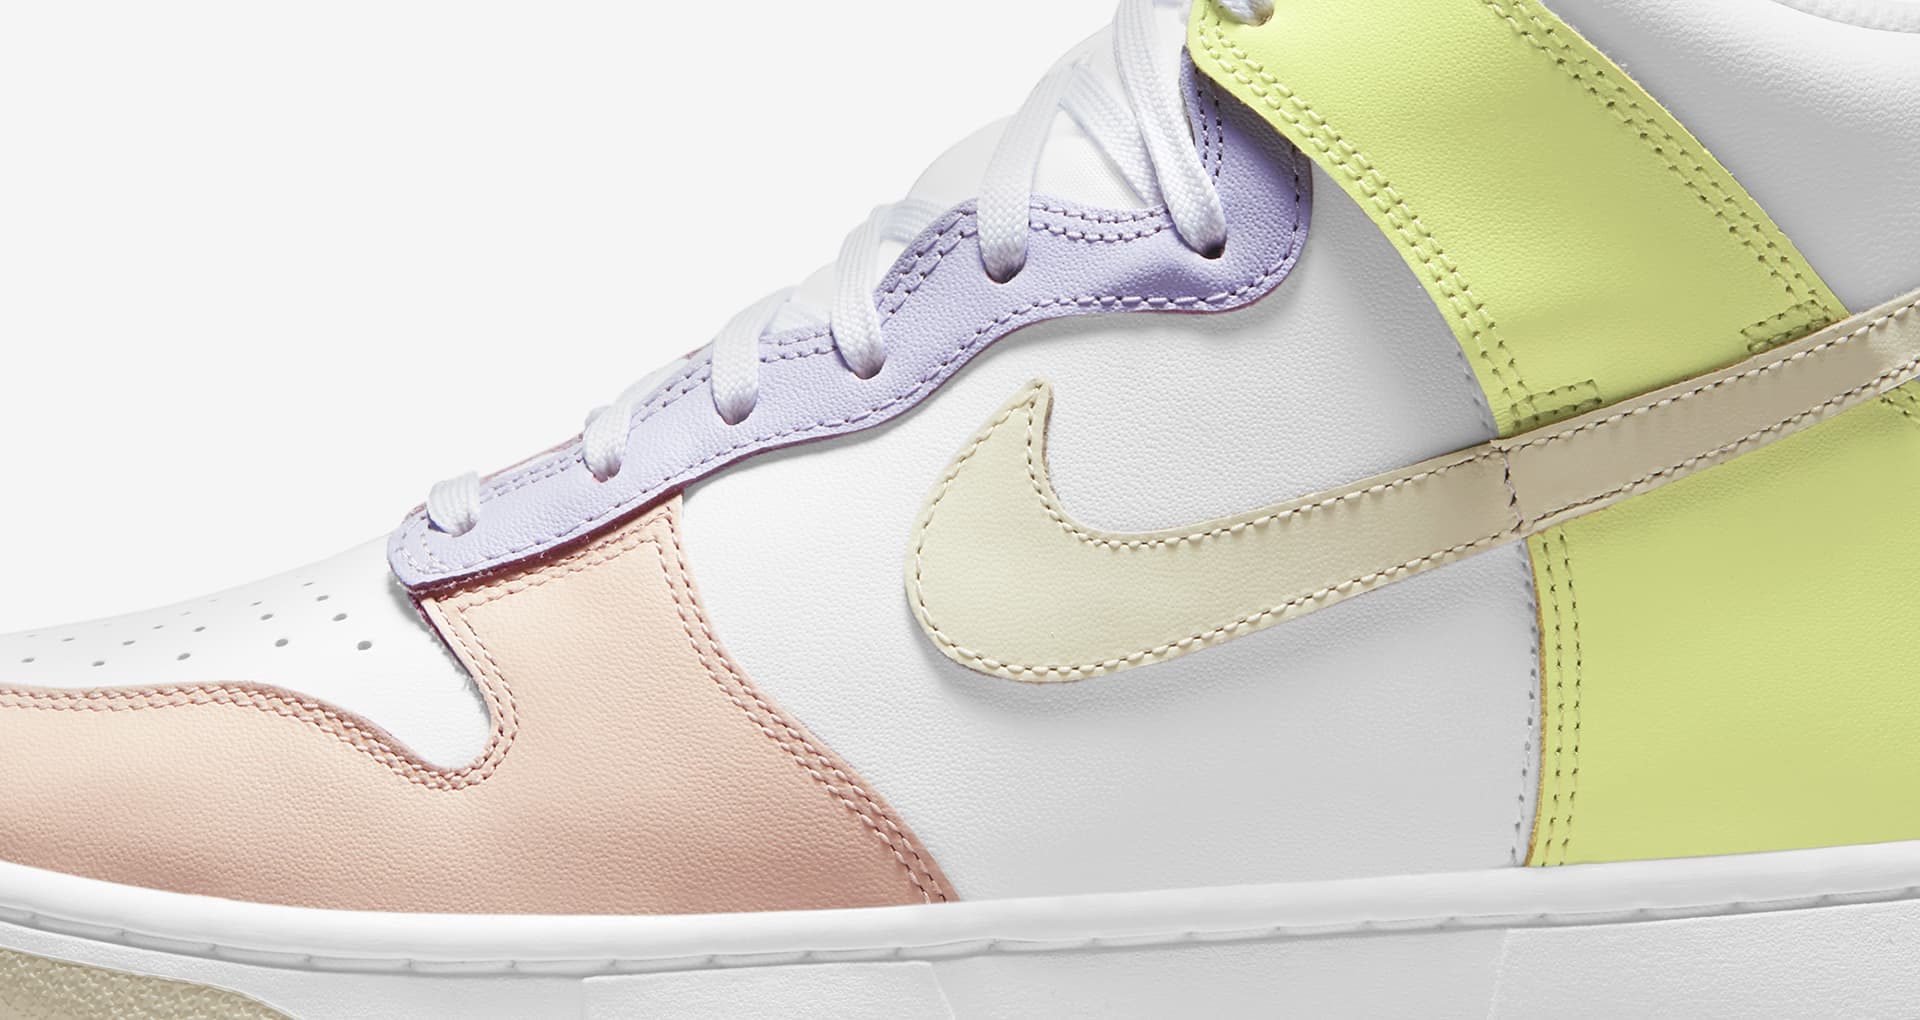 Women's Dunk High 'Cashmere' Release Date. Nike SNKRS MY